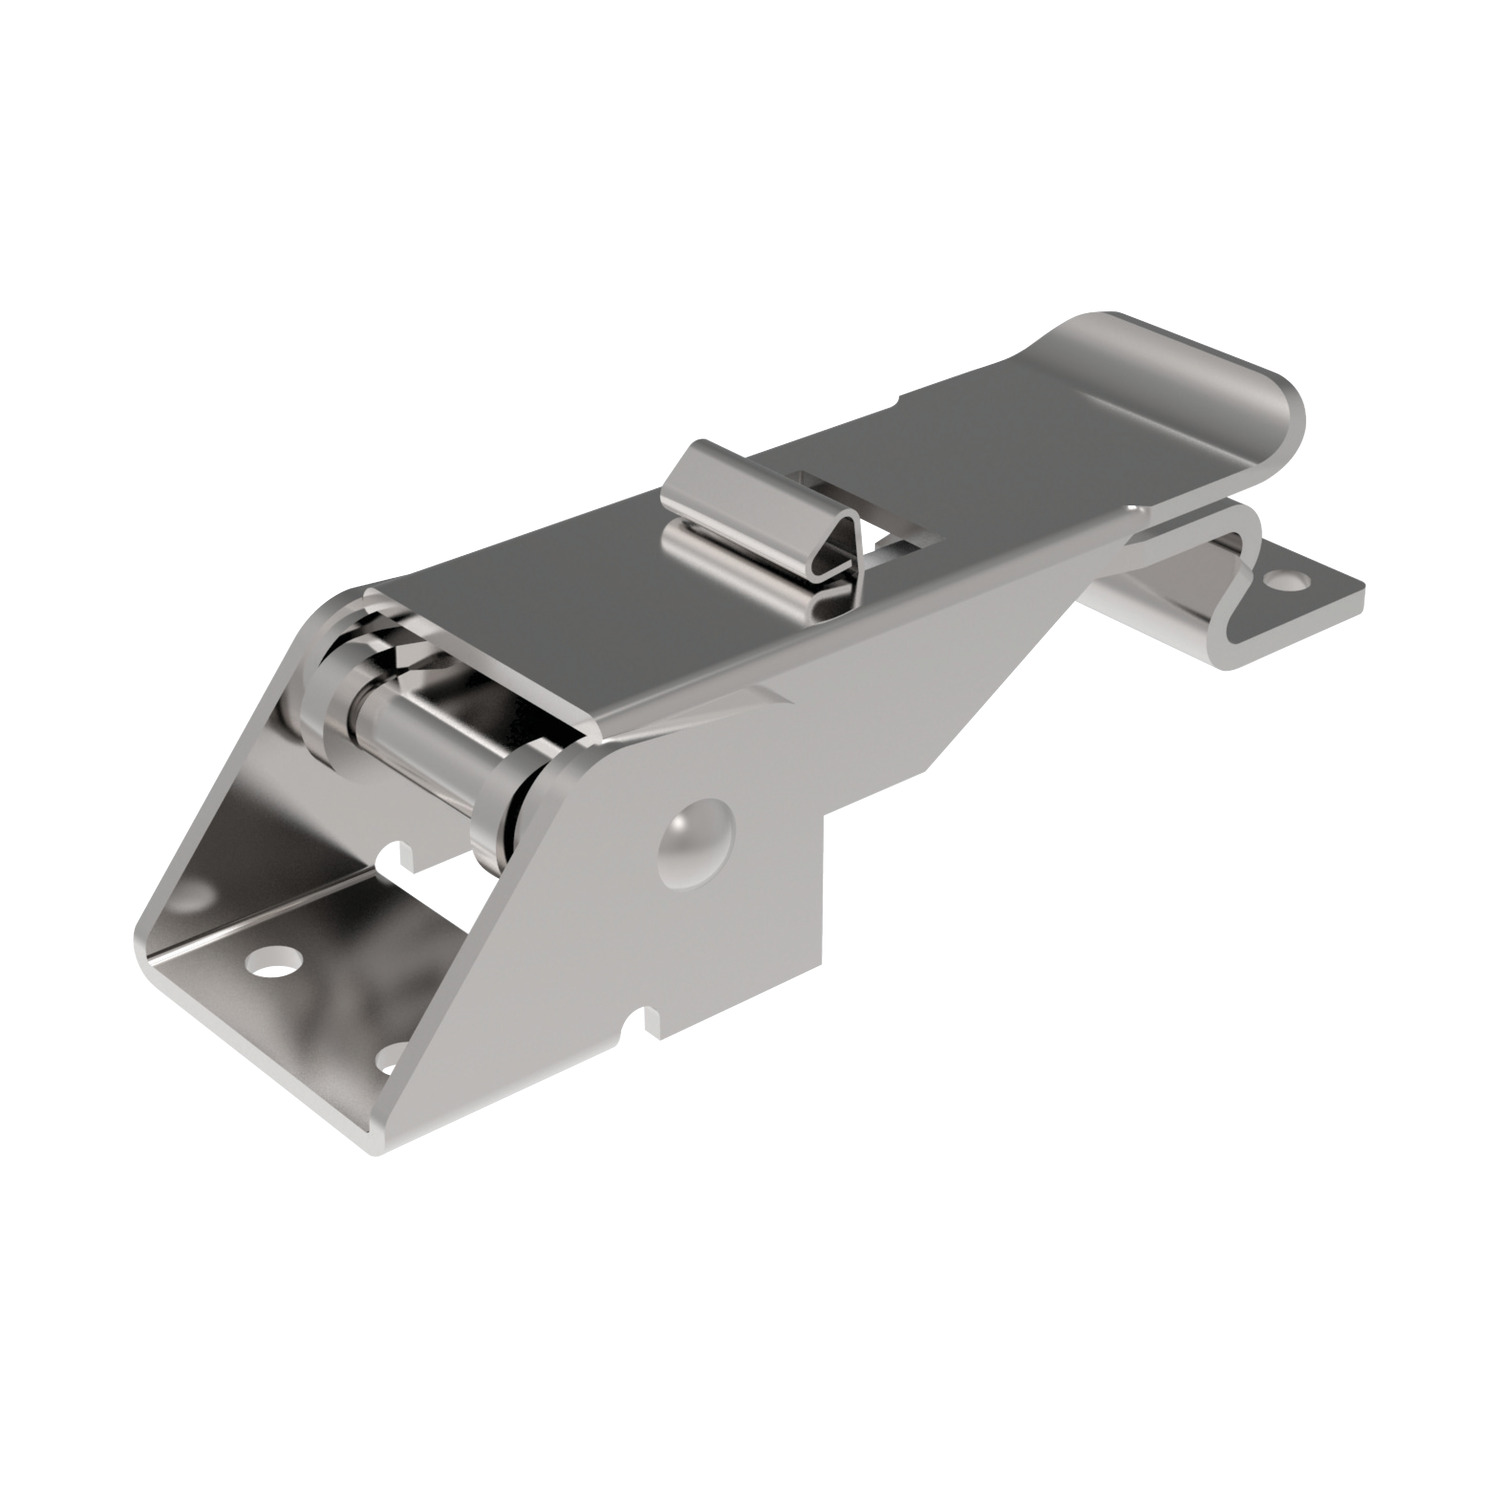 J0582.AC0004 Toggle Latches - Zinc plated steel. Zinc Plated Steel - 82-94 - 22 - 27